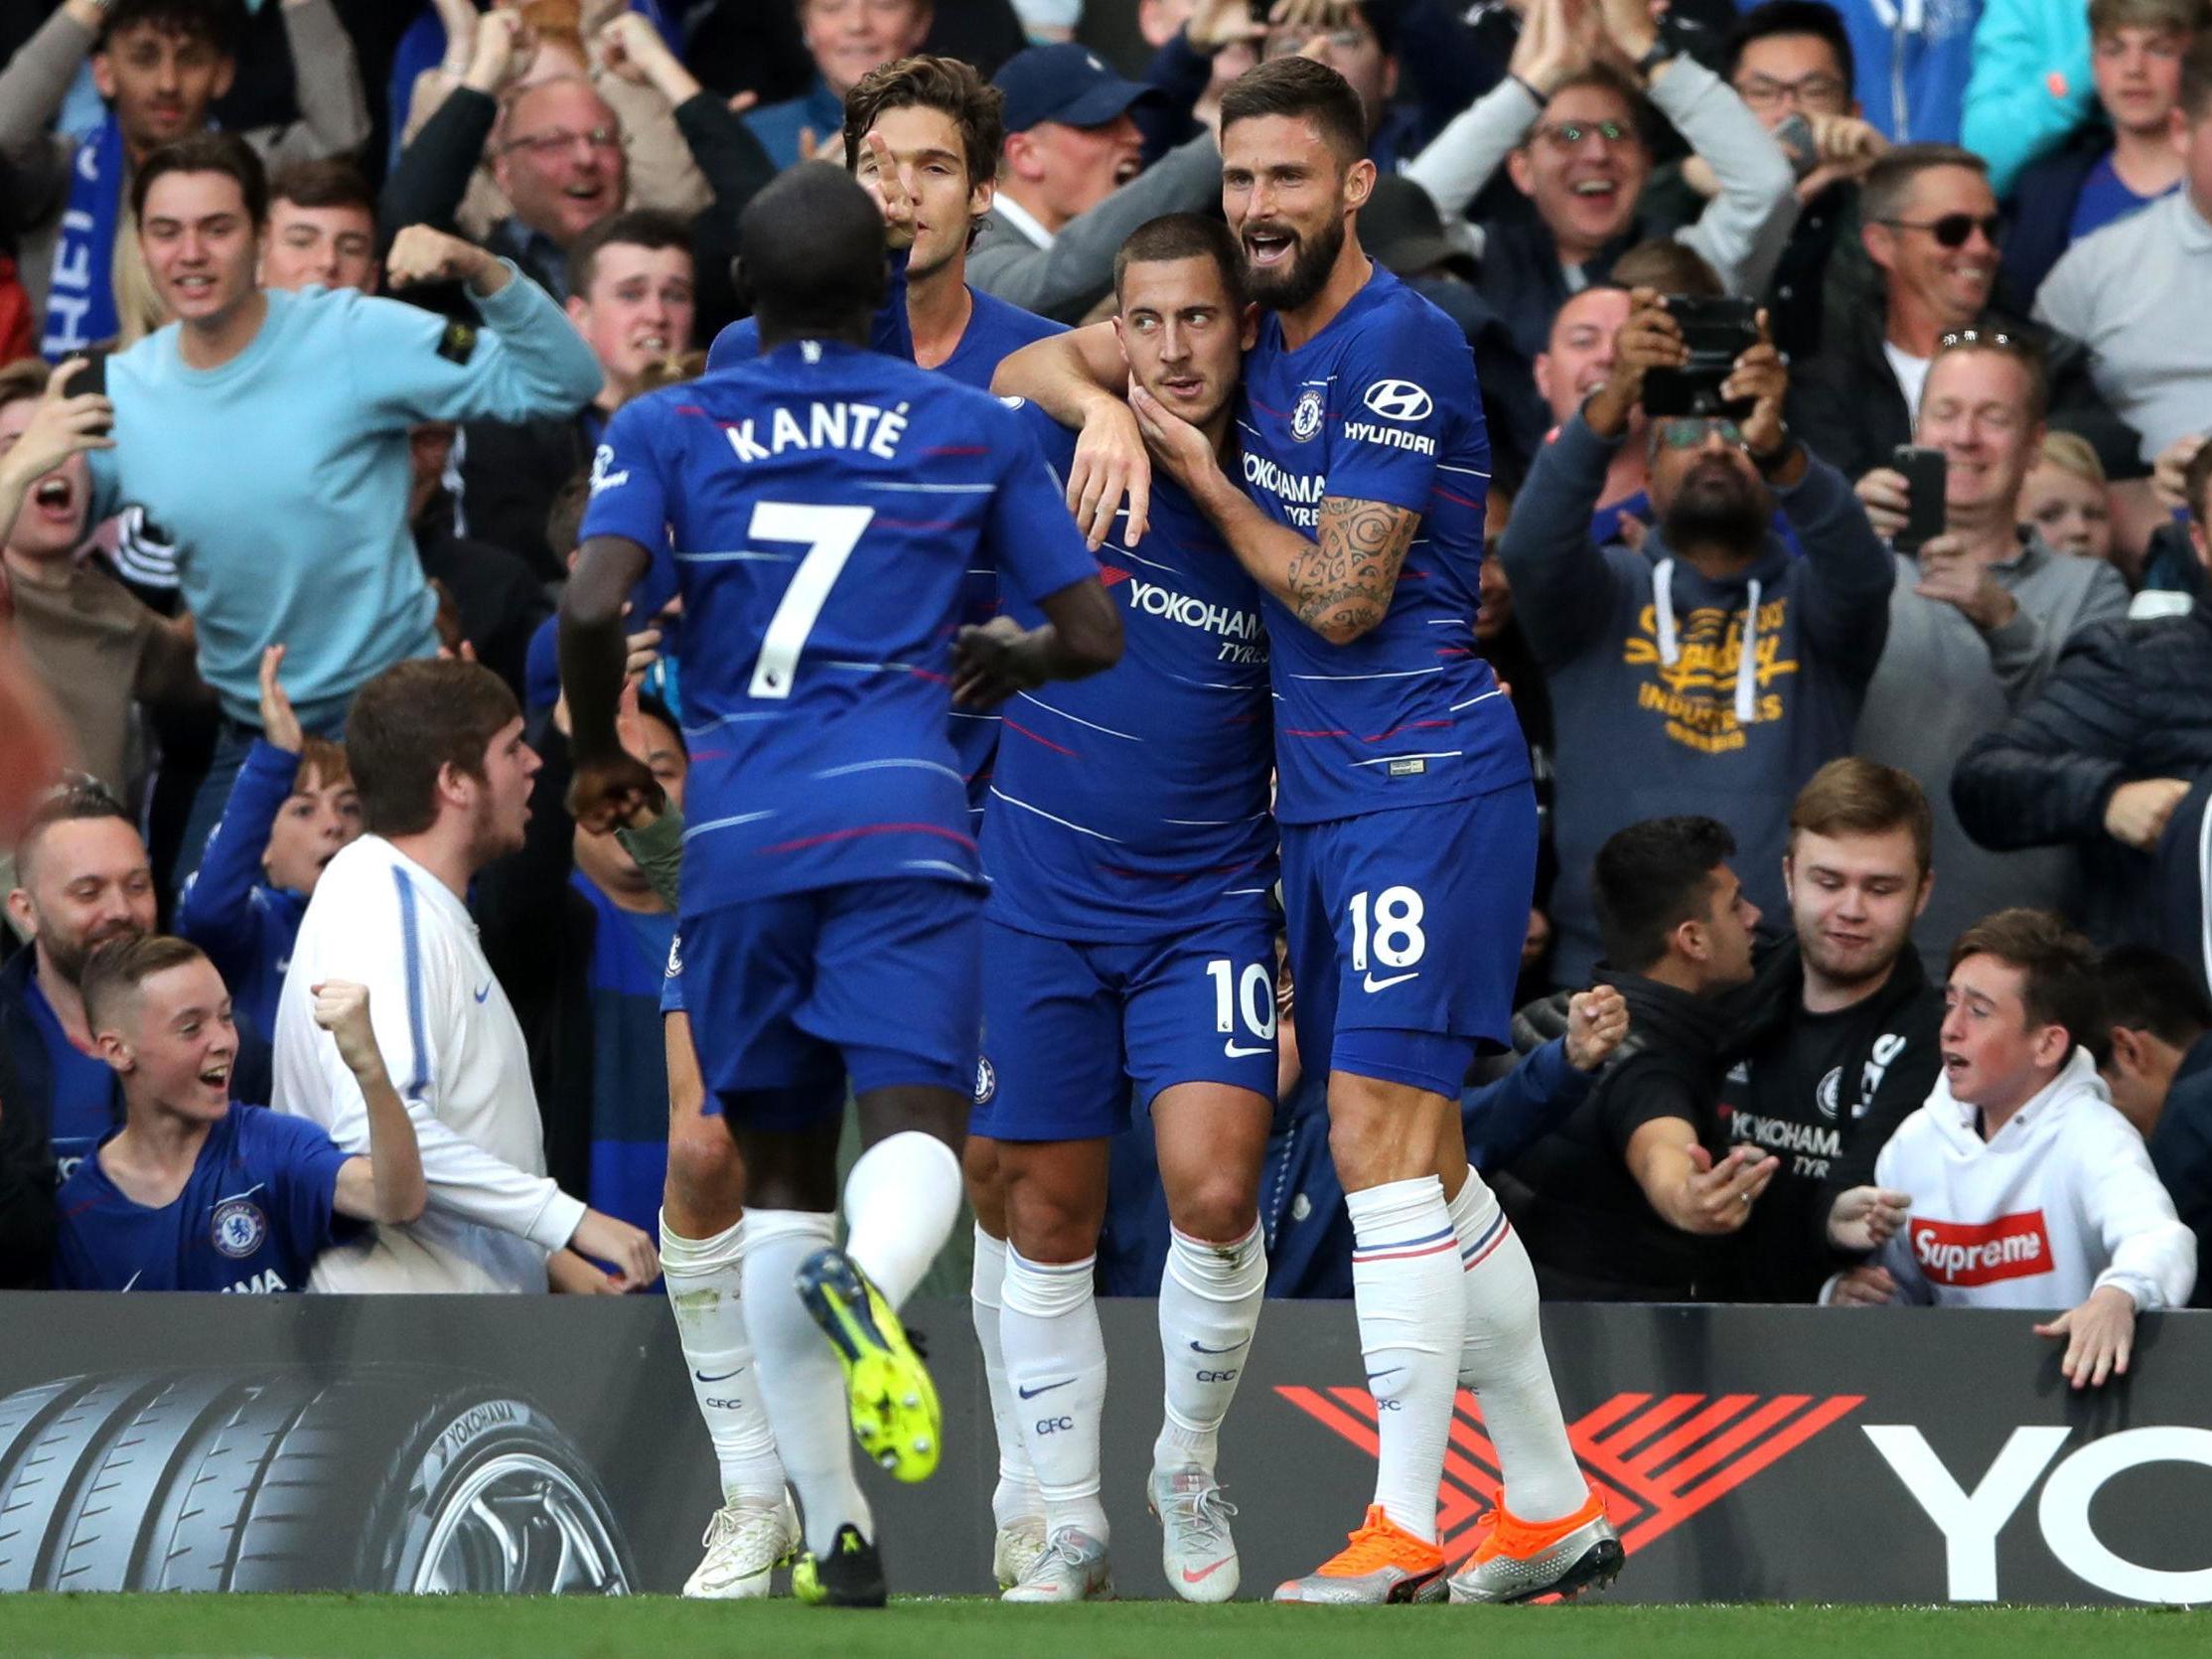 Chelsea vs Liverpool - LIVE: Latest score, goals and updates plus prediction, how to watch online, team news, line-ups, odds